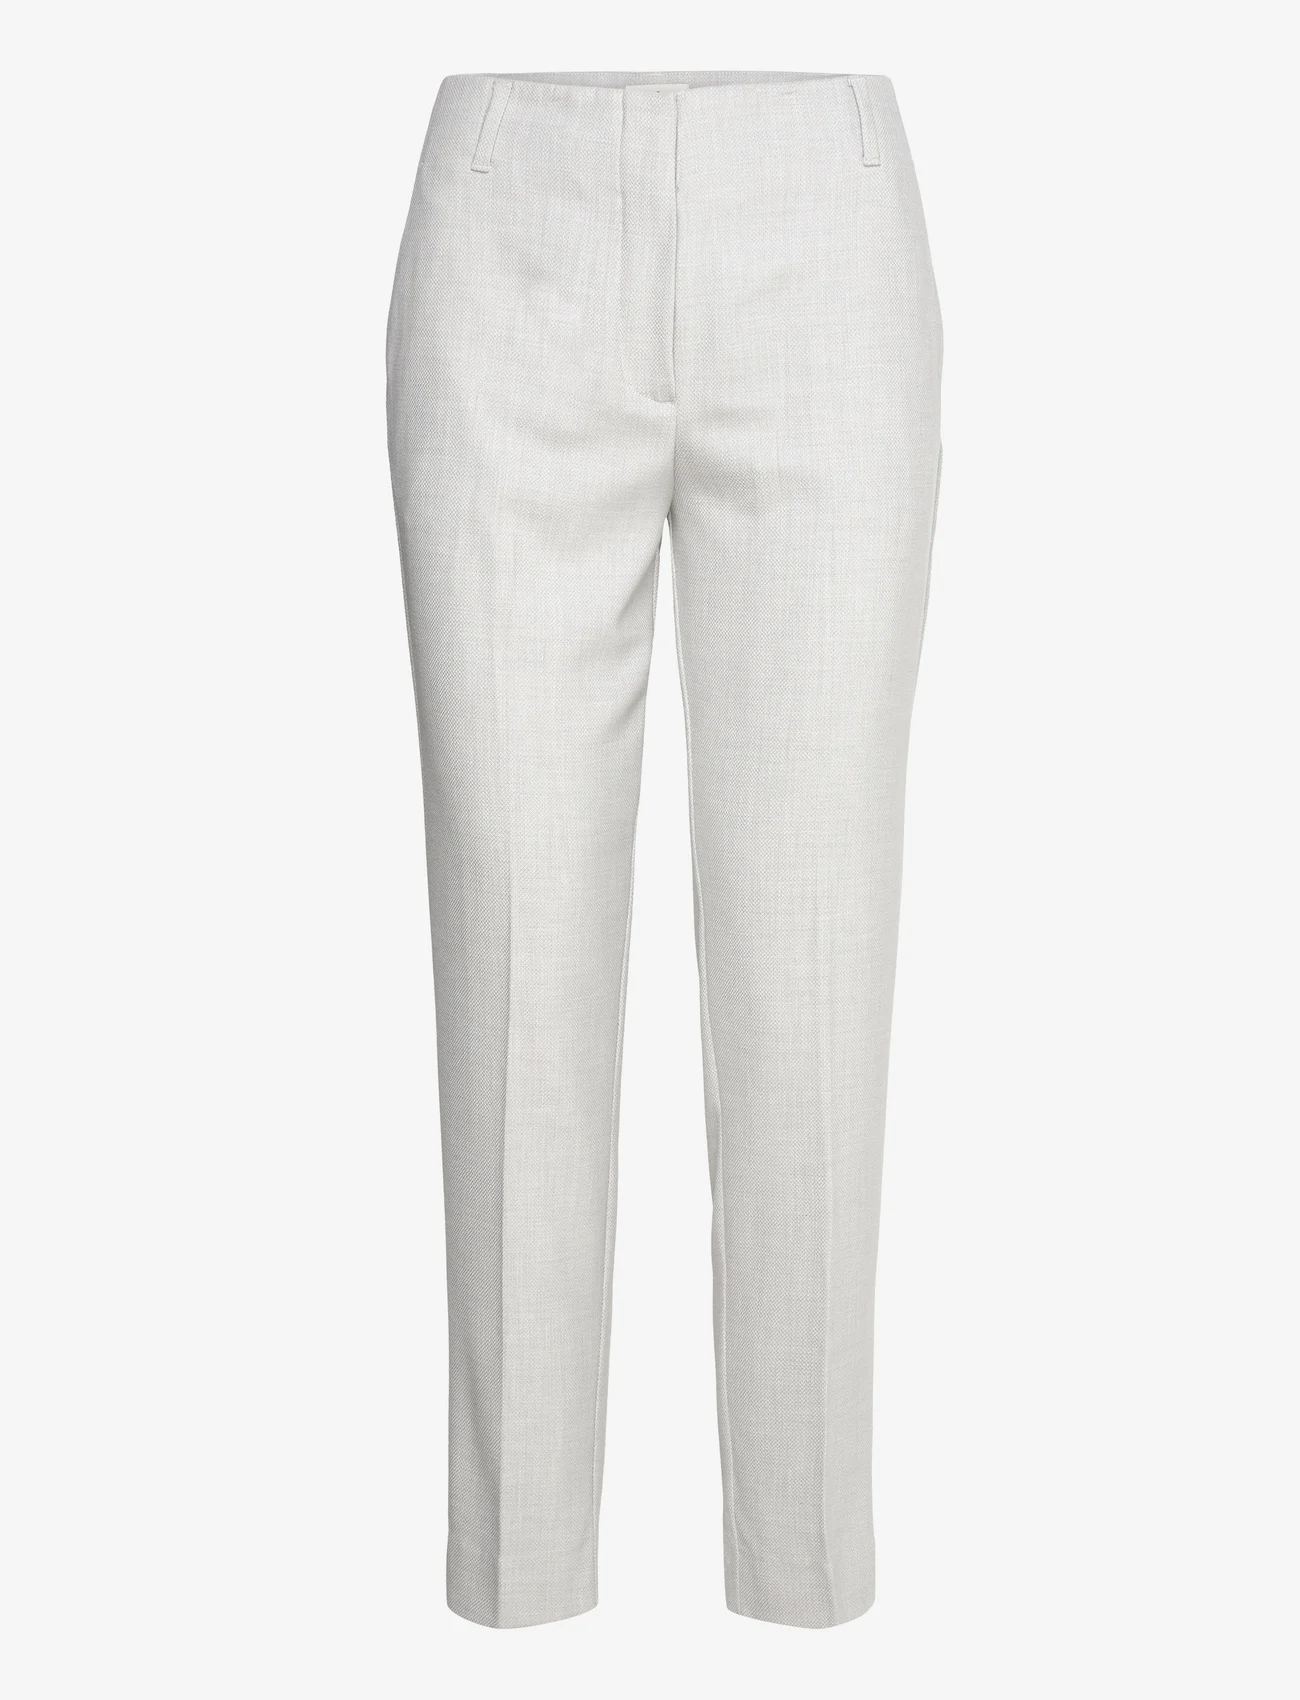 FIVEUNITS - JuliaFV - tailored trousers - oyster melange - 0